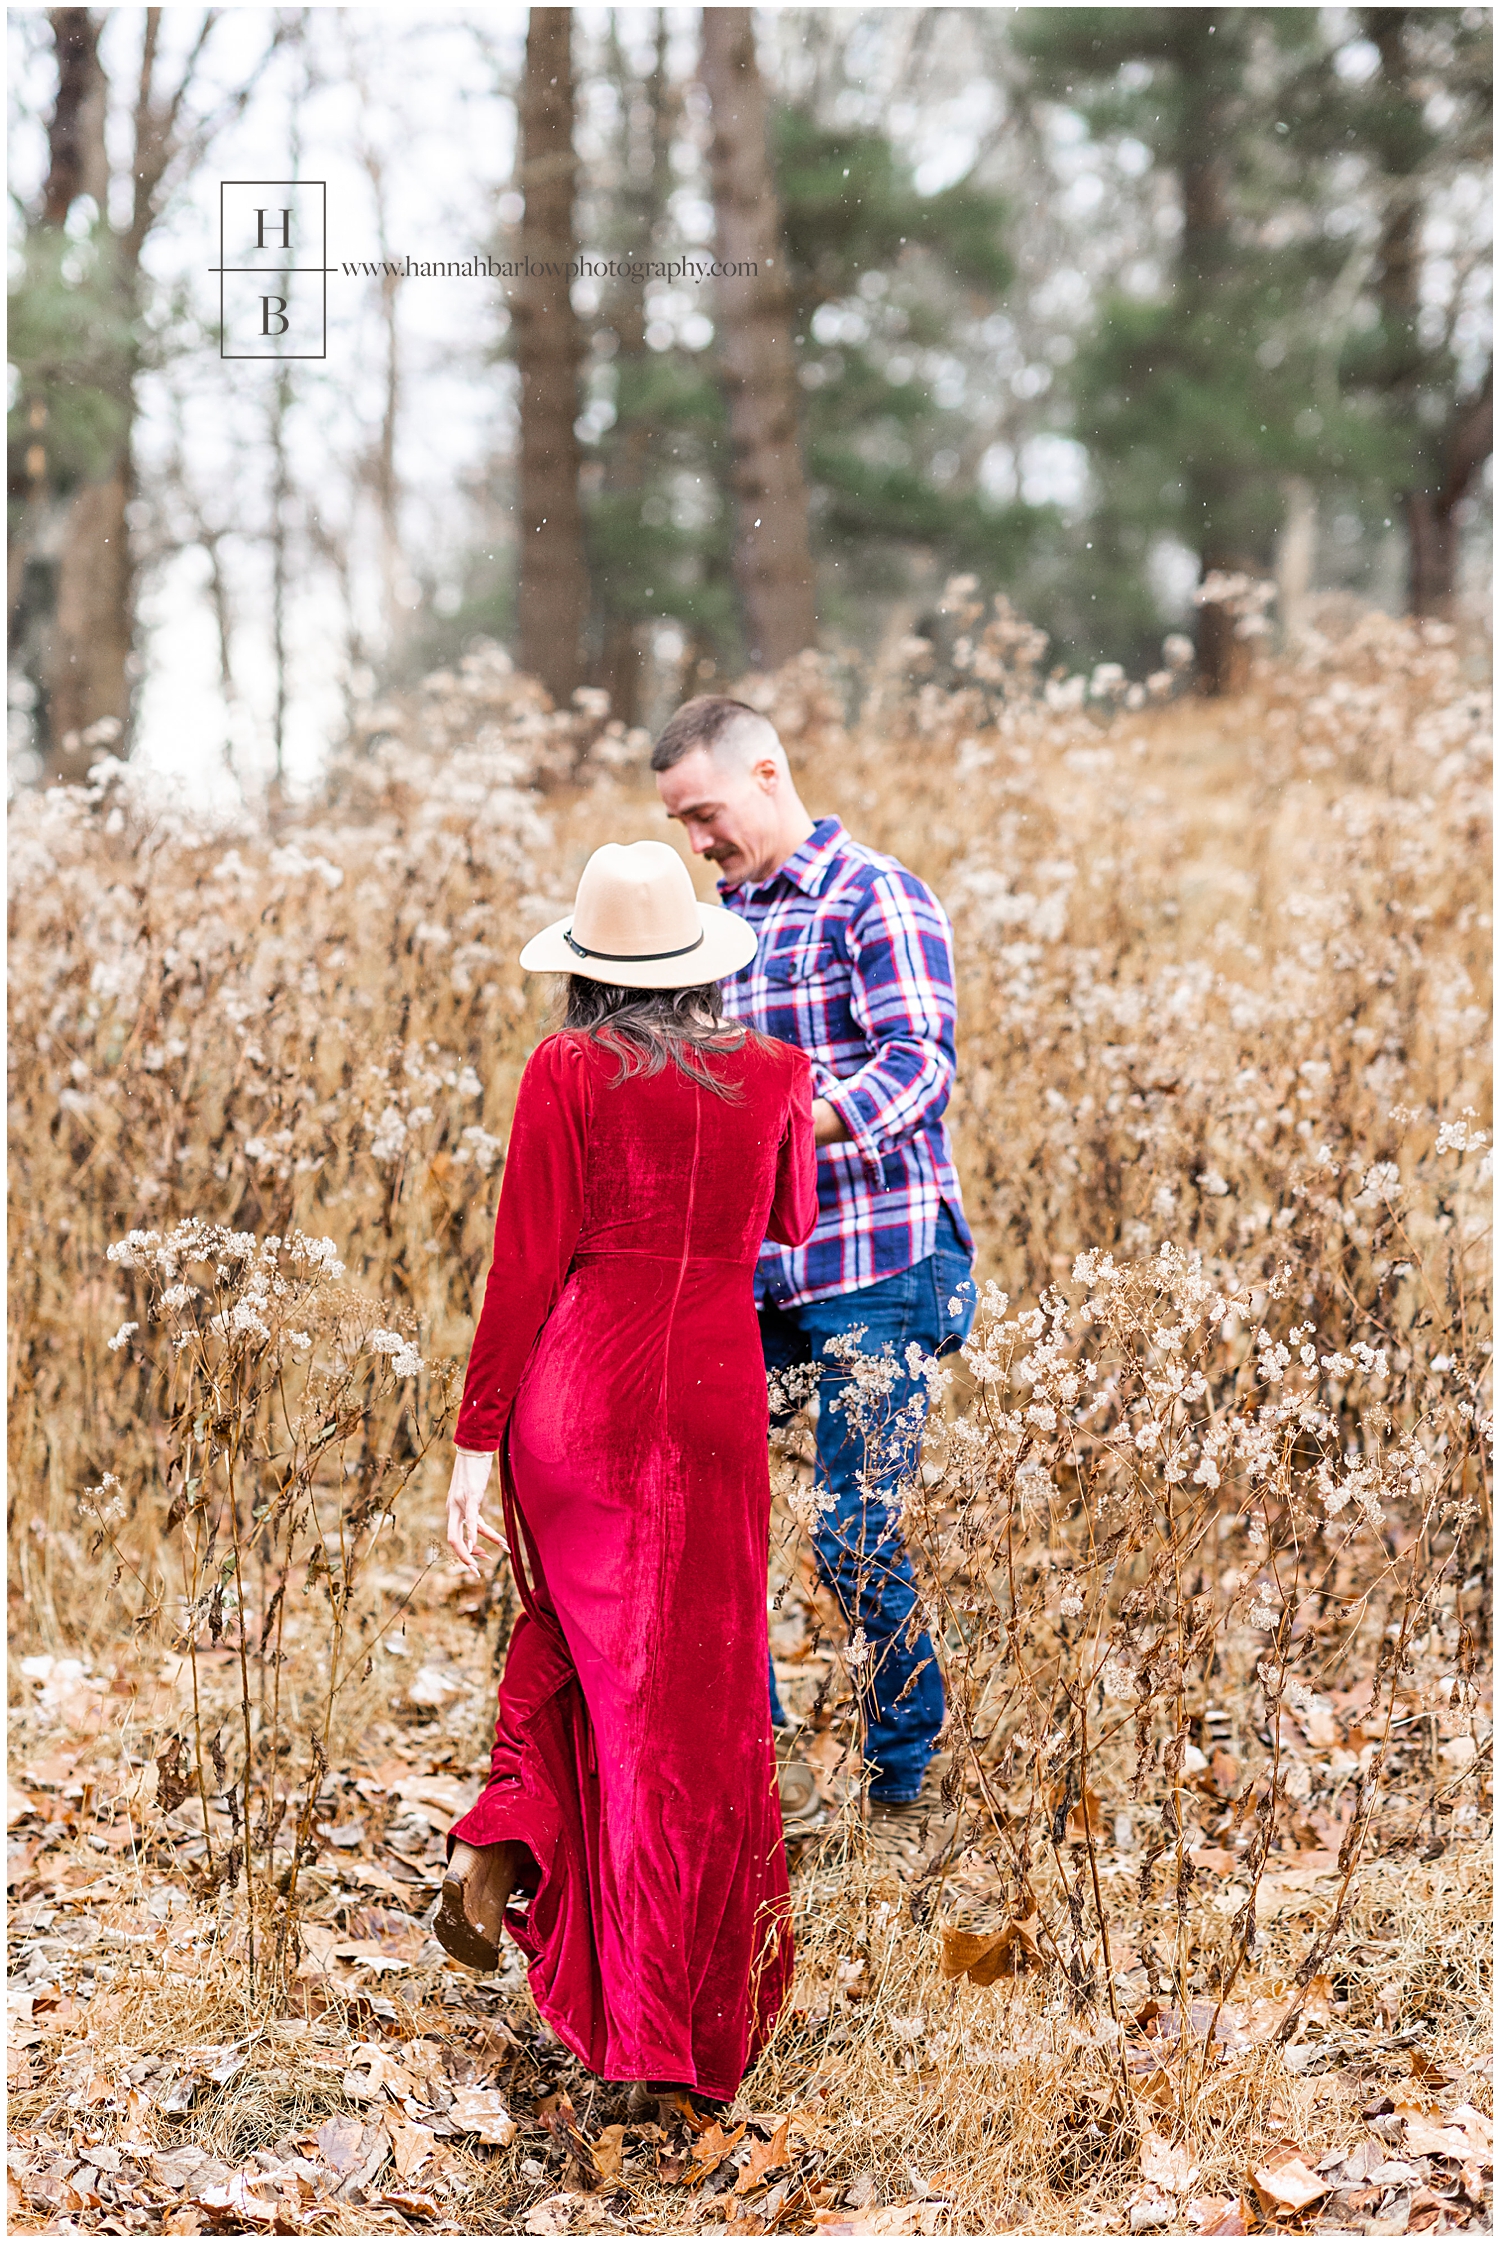 Man in blue flannel shirt escorts wife in red dress into weed line for engagement photos.